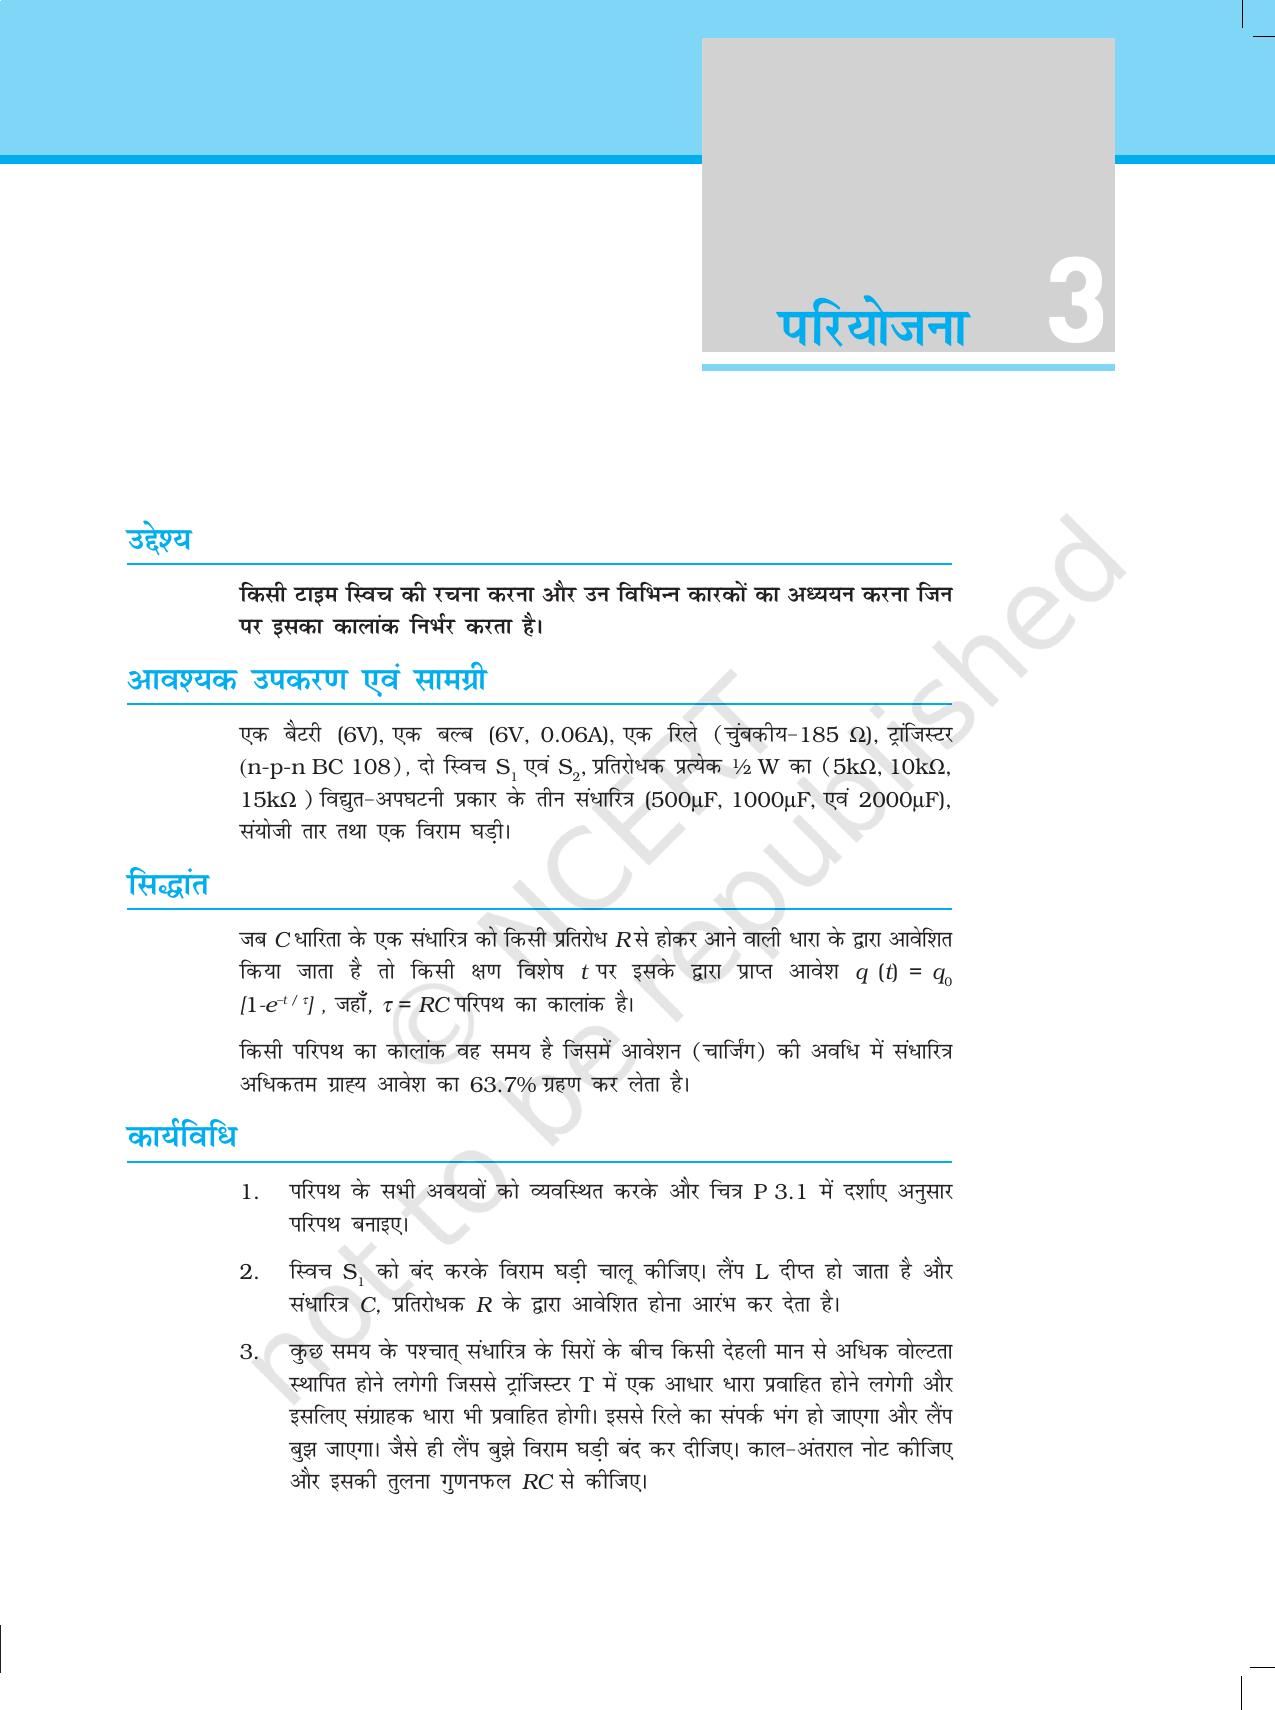 NCERT Laboratory Manuals for Class XII भौतिकी - परियोजना (1 - 7) - Page 11